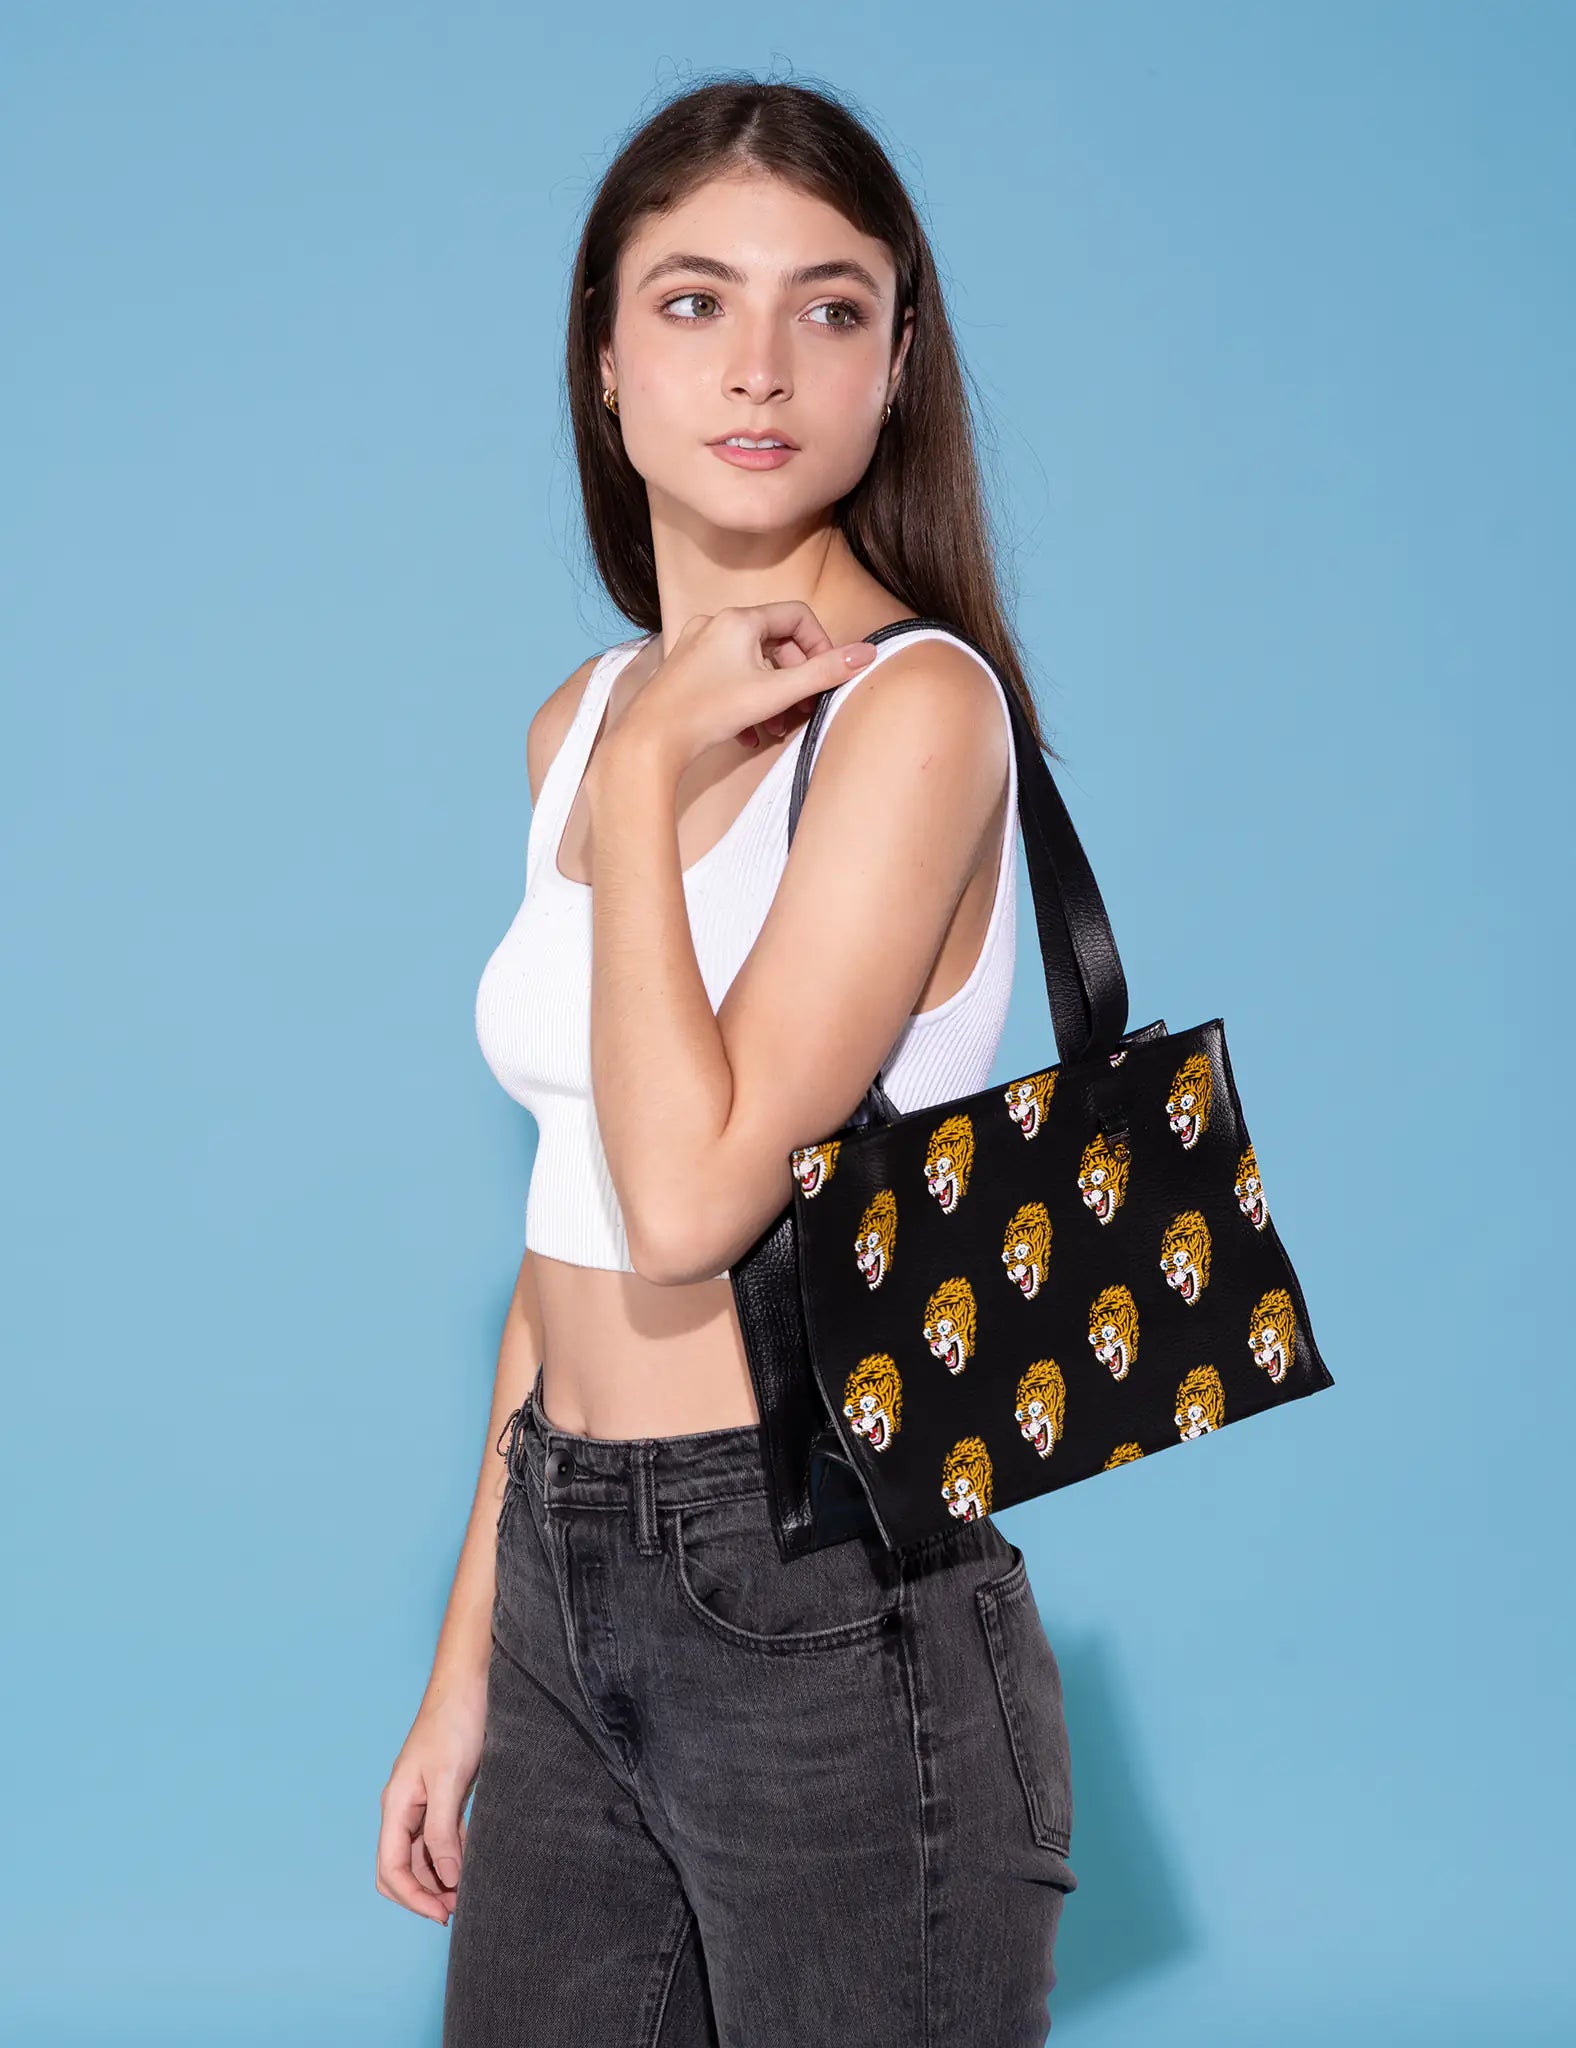 A young woman wearing a white crop top and black jeans is showcasing a Marko tote bag with a black background and multiple colorful tiger head designs. The background is a solid light blue, creating a vibrant contrast.